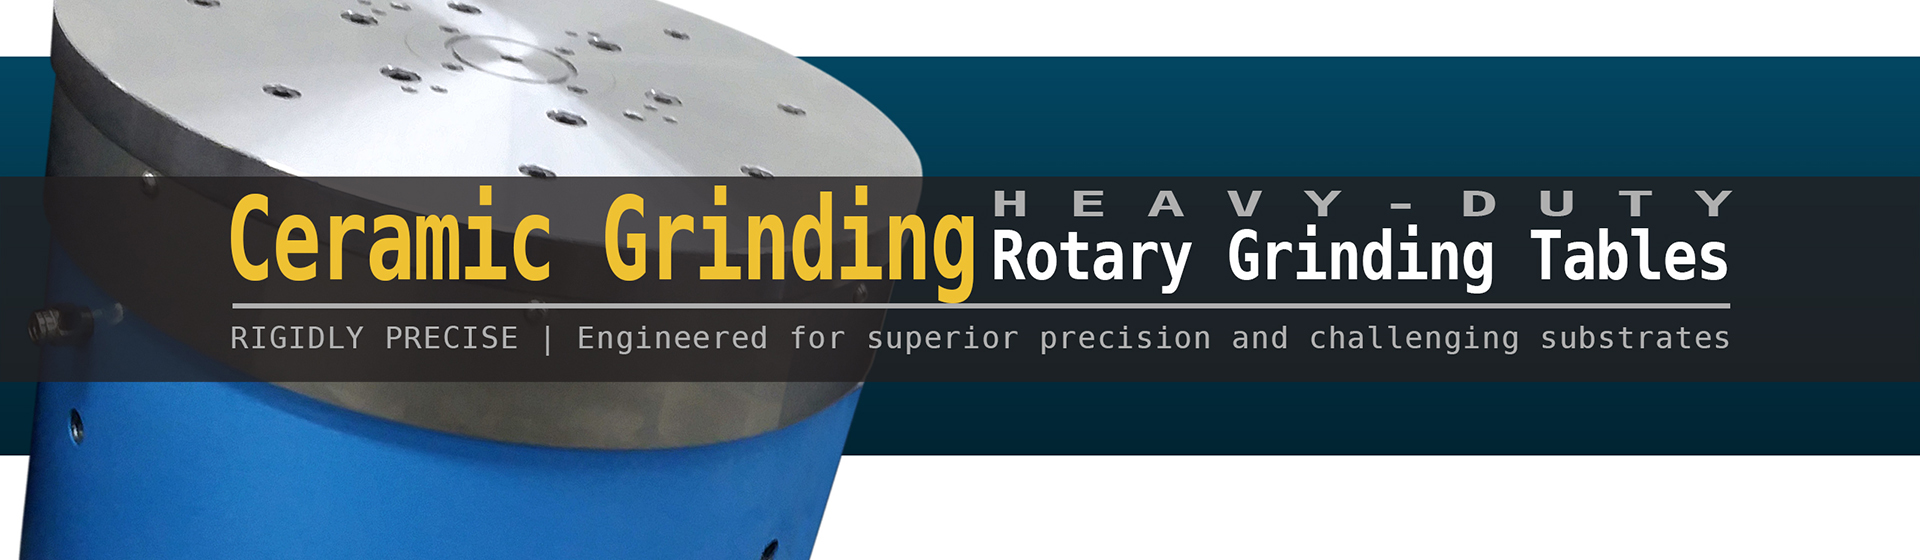 A rotor inspection rotary table